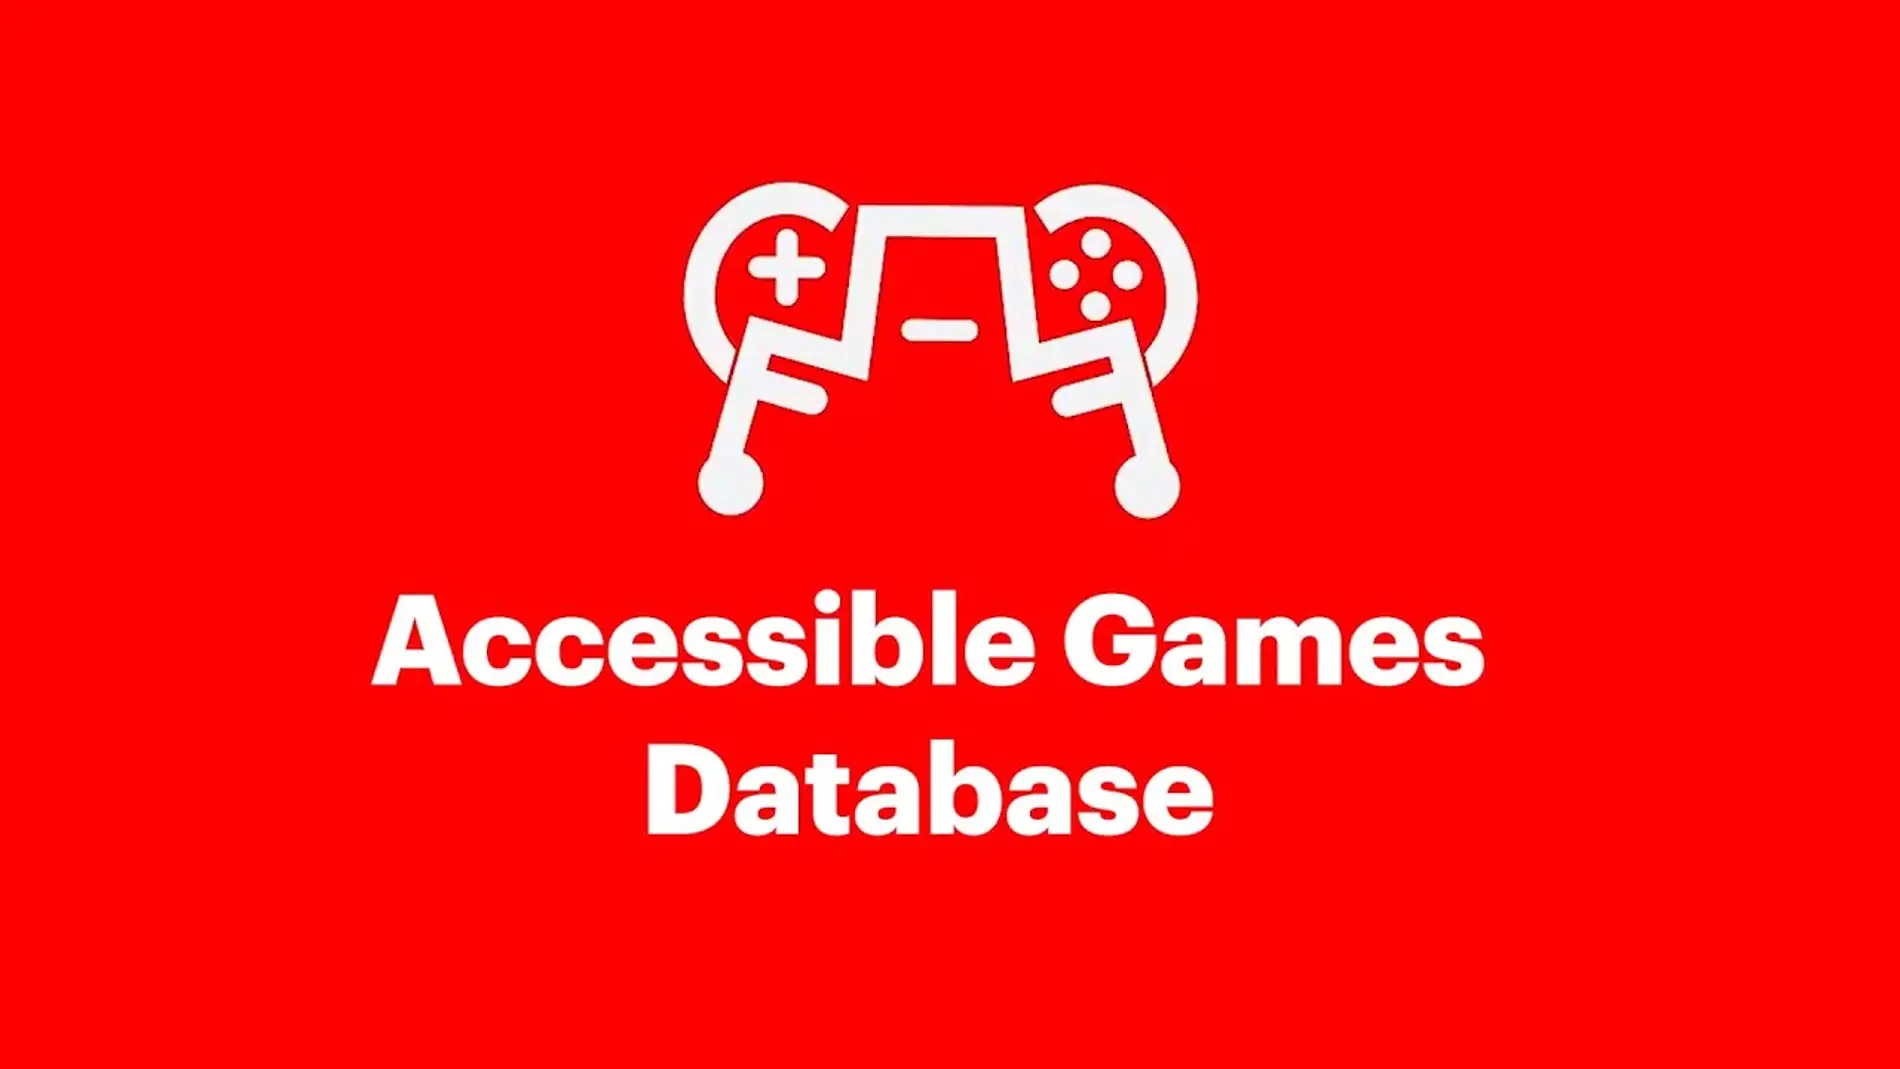 Accesible Games Database